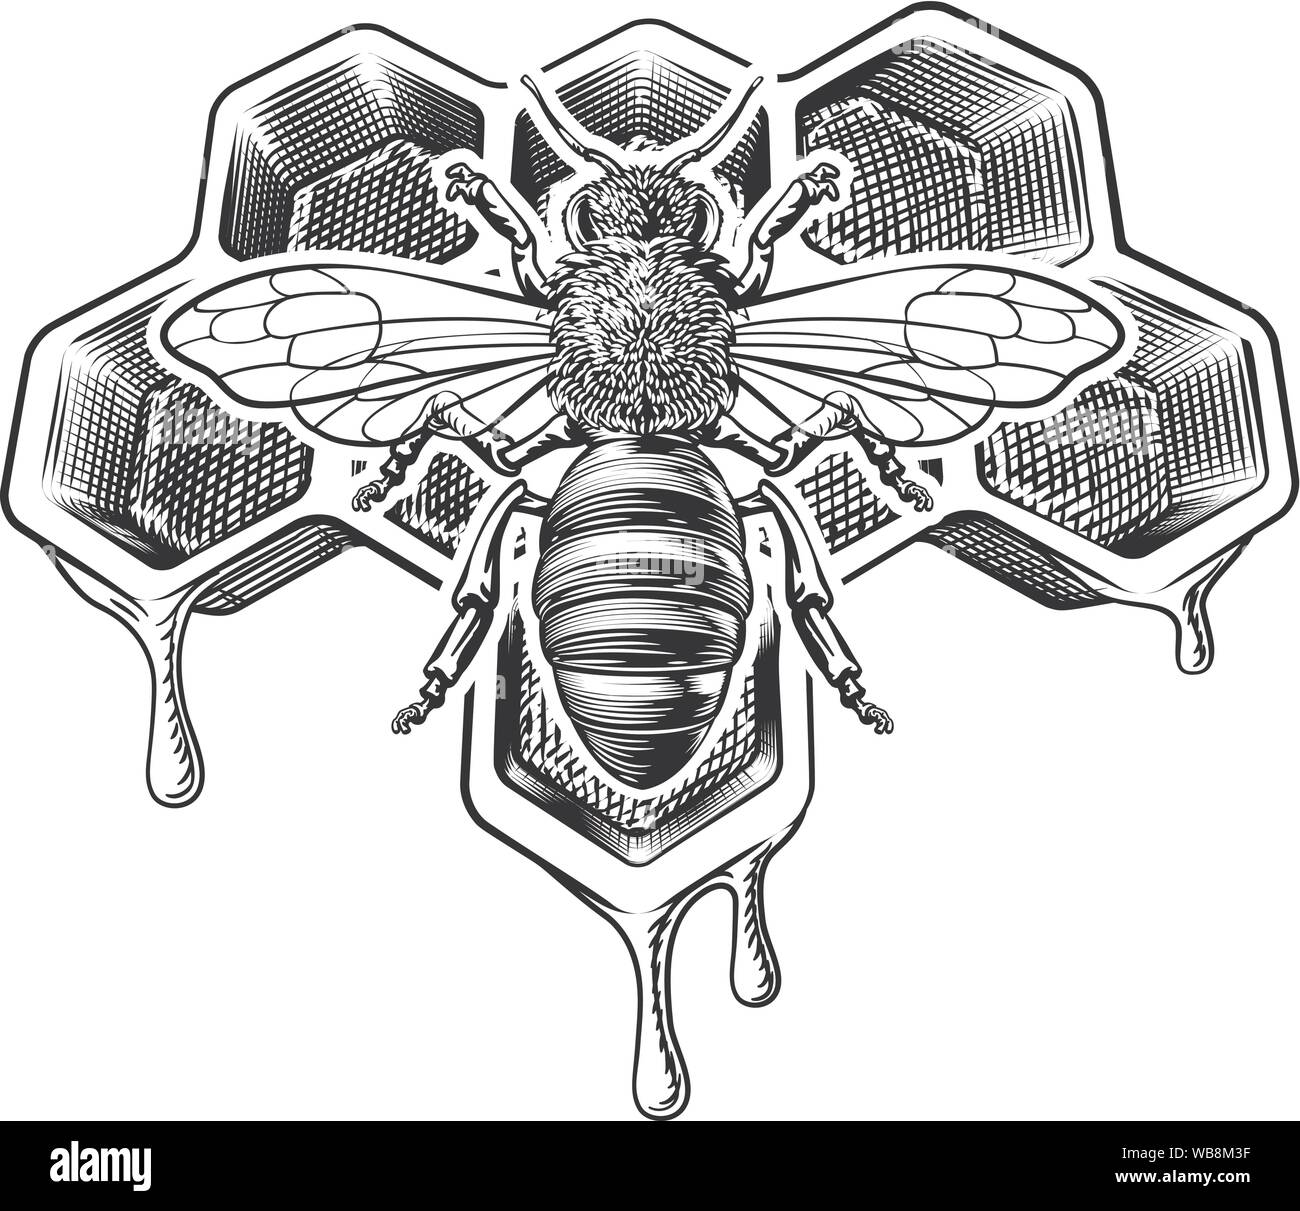 Honey Bumble Bee and Honeycomb Vintage Drawing Stock Vector